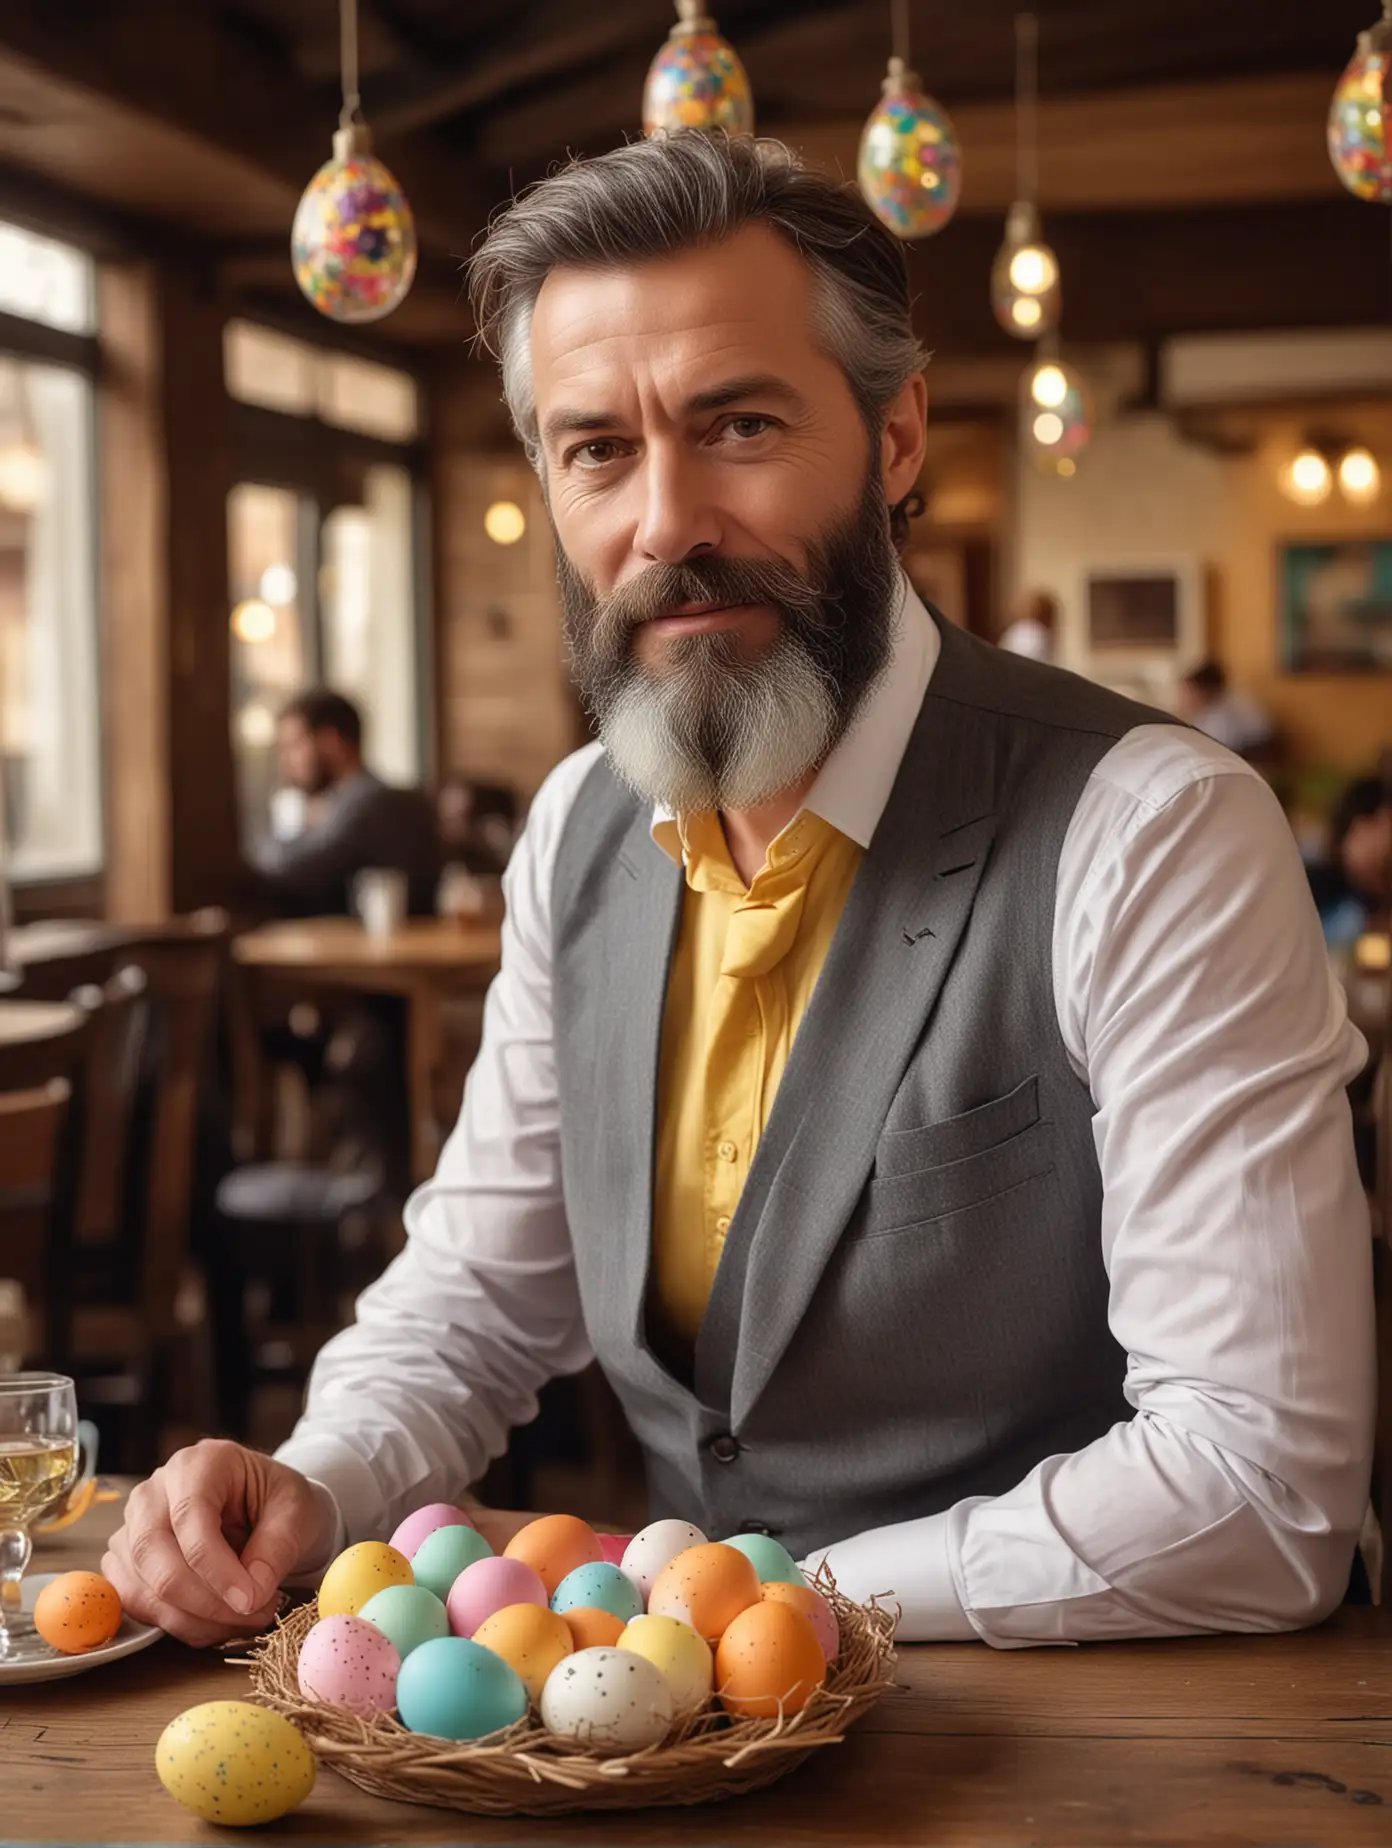 Bearded middle-aged man with exquisite facial features and colorful eggs, dressed elegantly and celebrating Easter in a western restaurant, naughty and cute movements, facing the camera, professional photography skills, full body shot, focused and charming expression